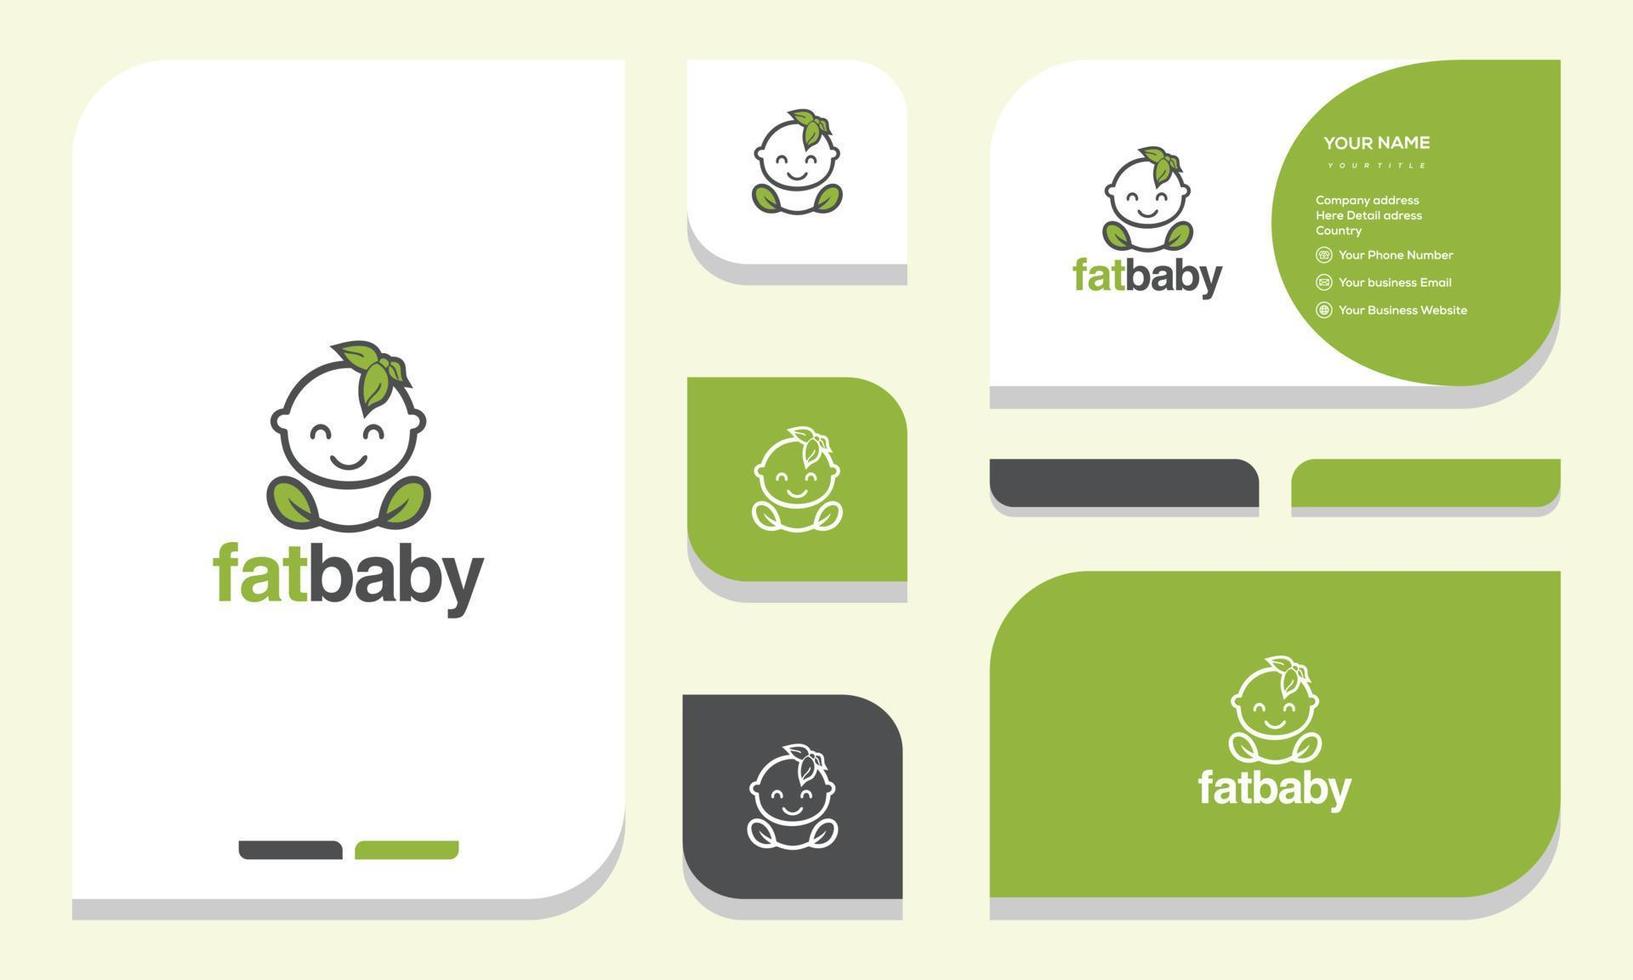 baby leaf logo vector icon illustration. logo and business card